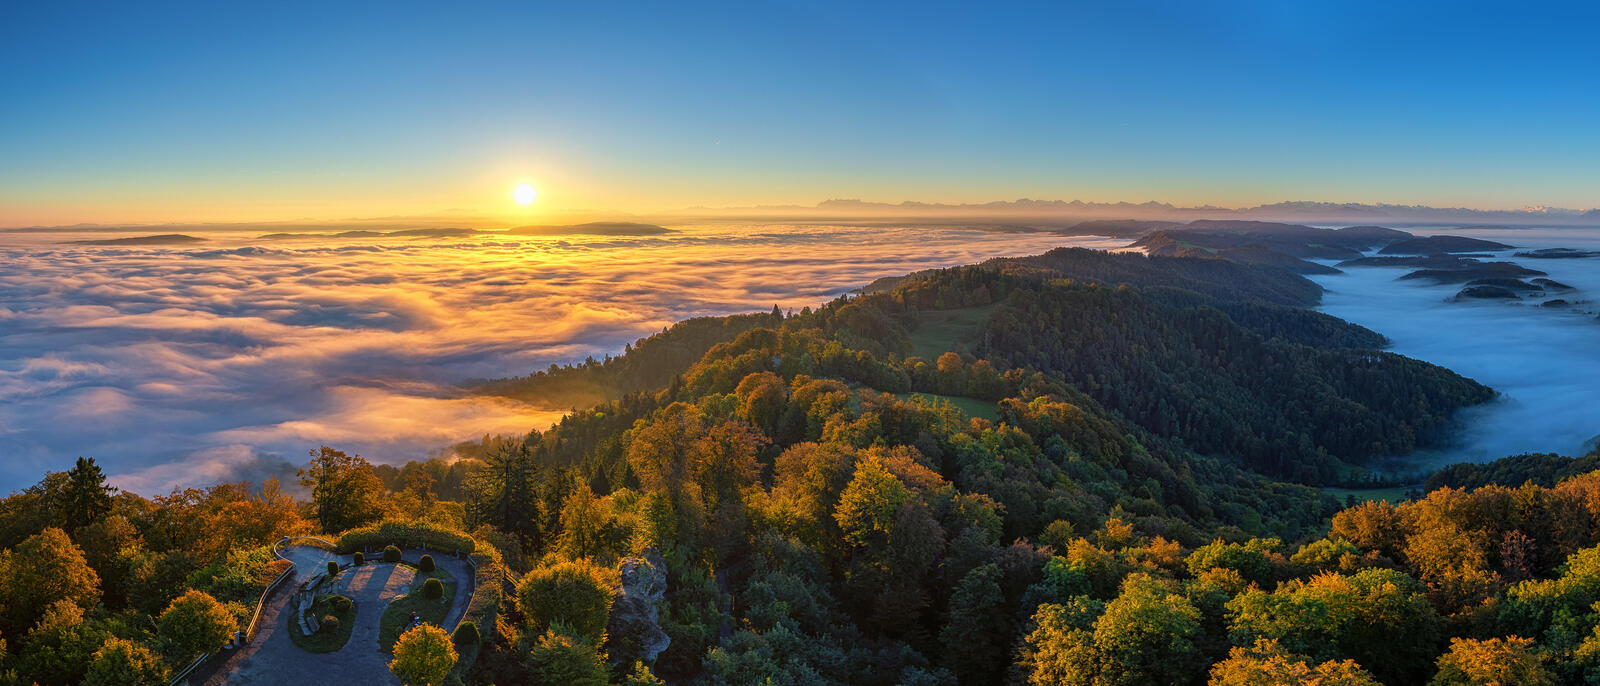 Wallpapers Zurich The sea of fog Sunrise on the desktop